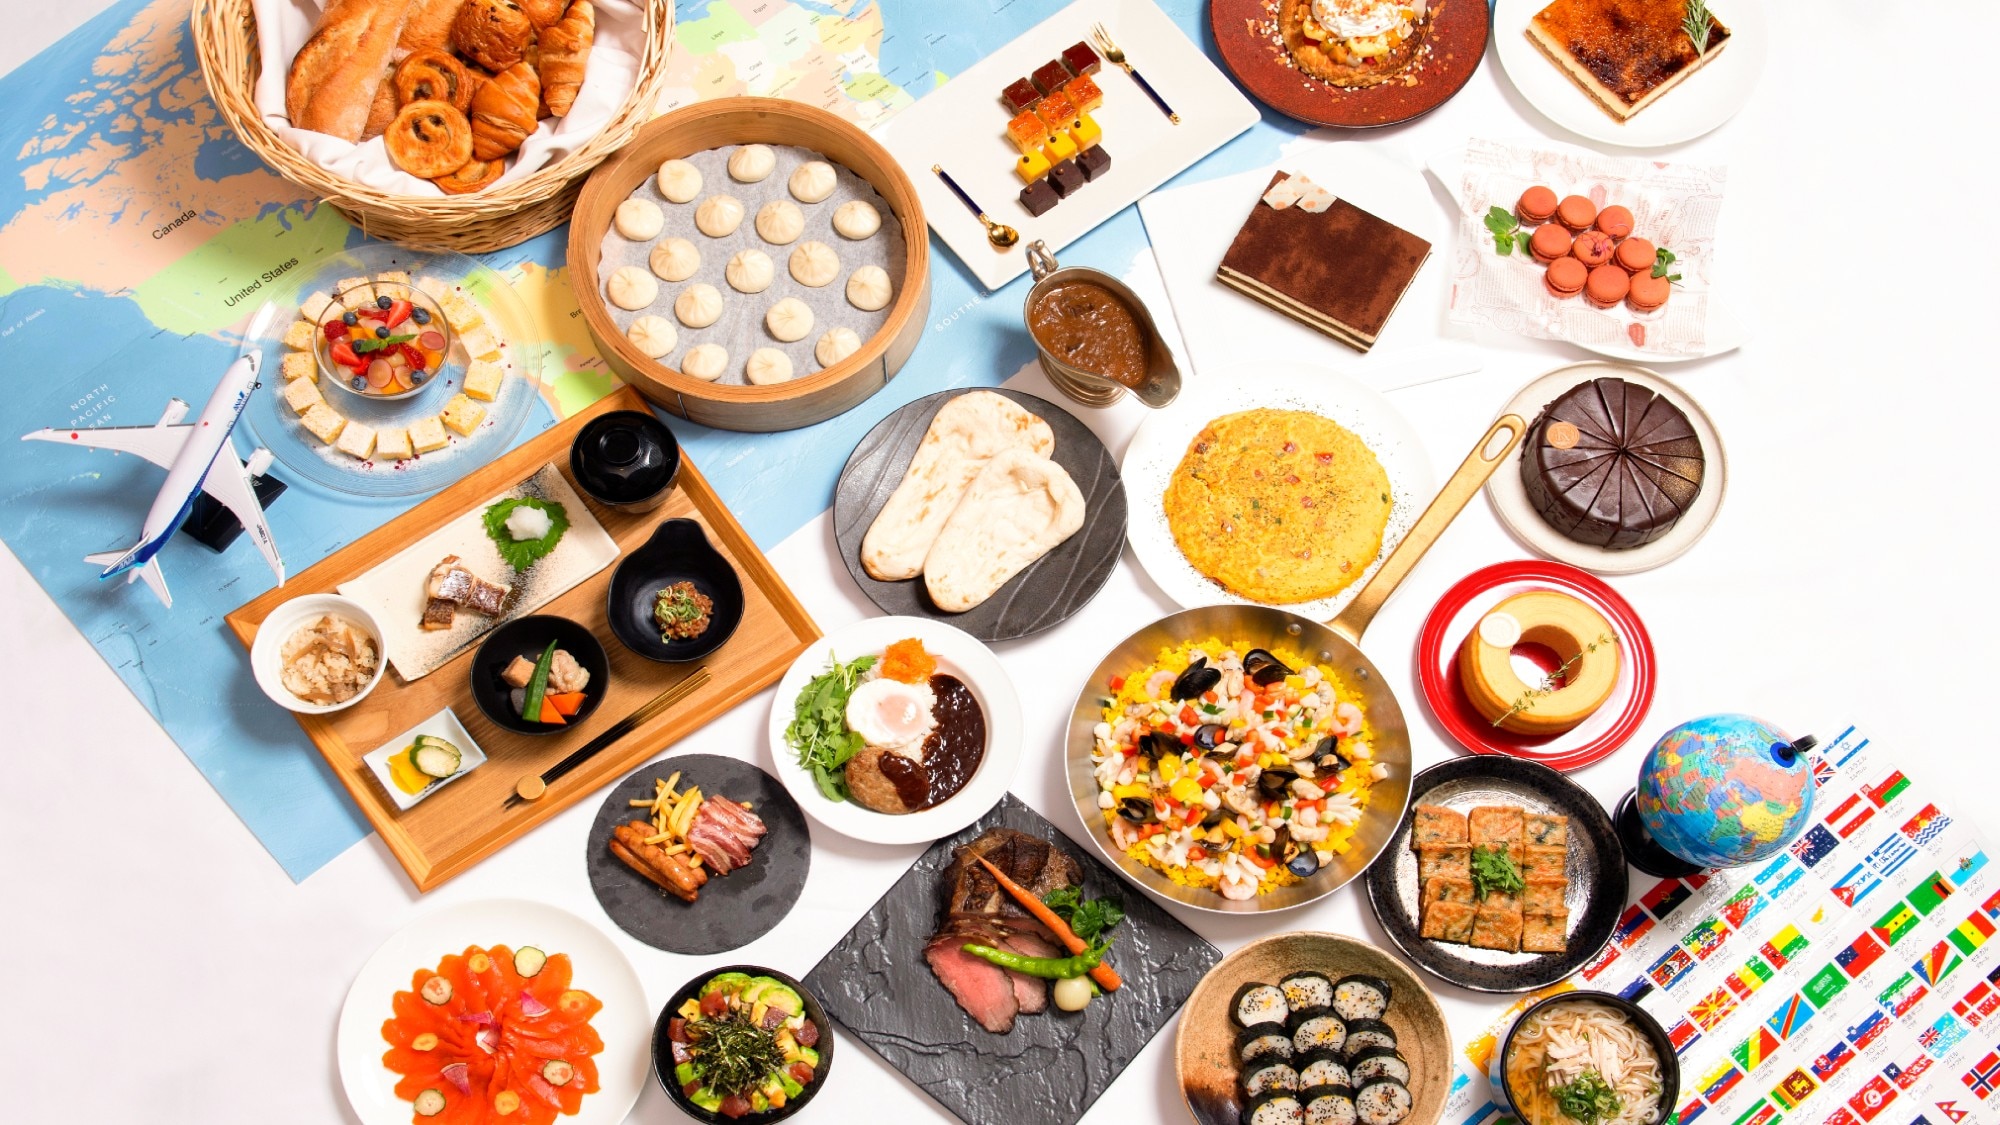 ■ "Breakfast of the world" where you can enjoy 25 kinds of meals from all over the world